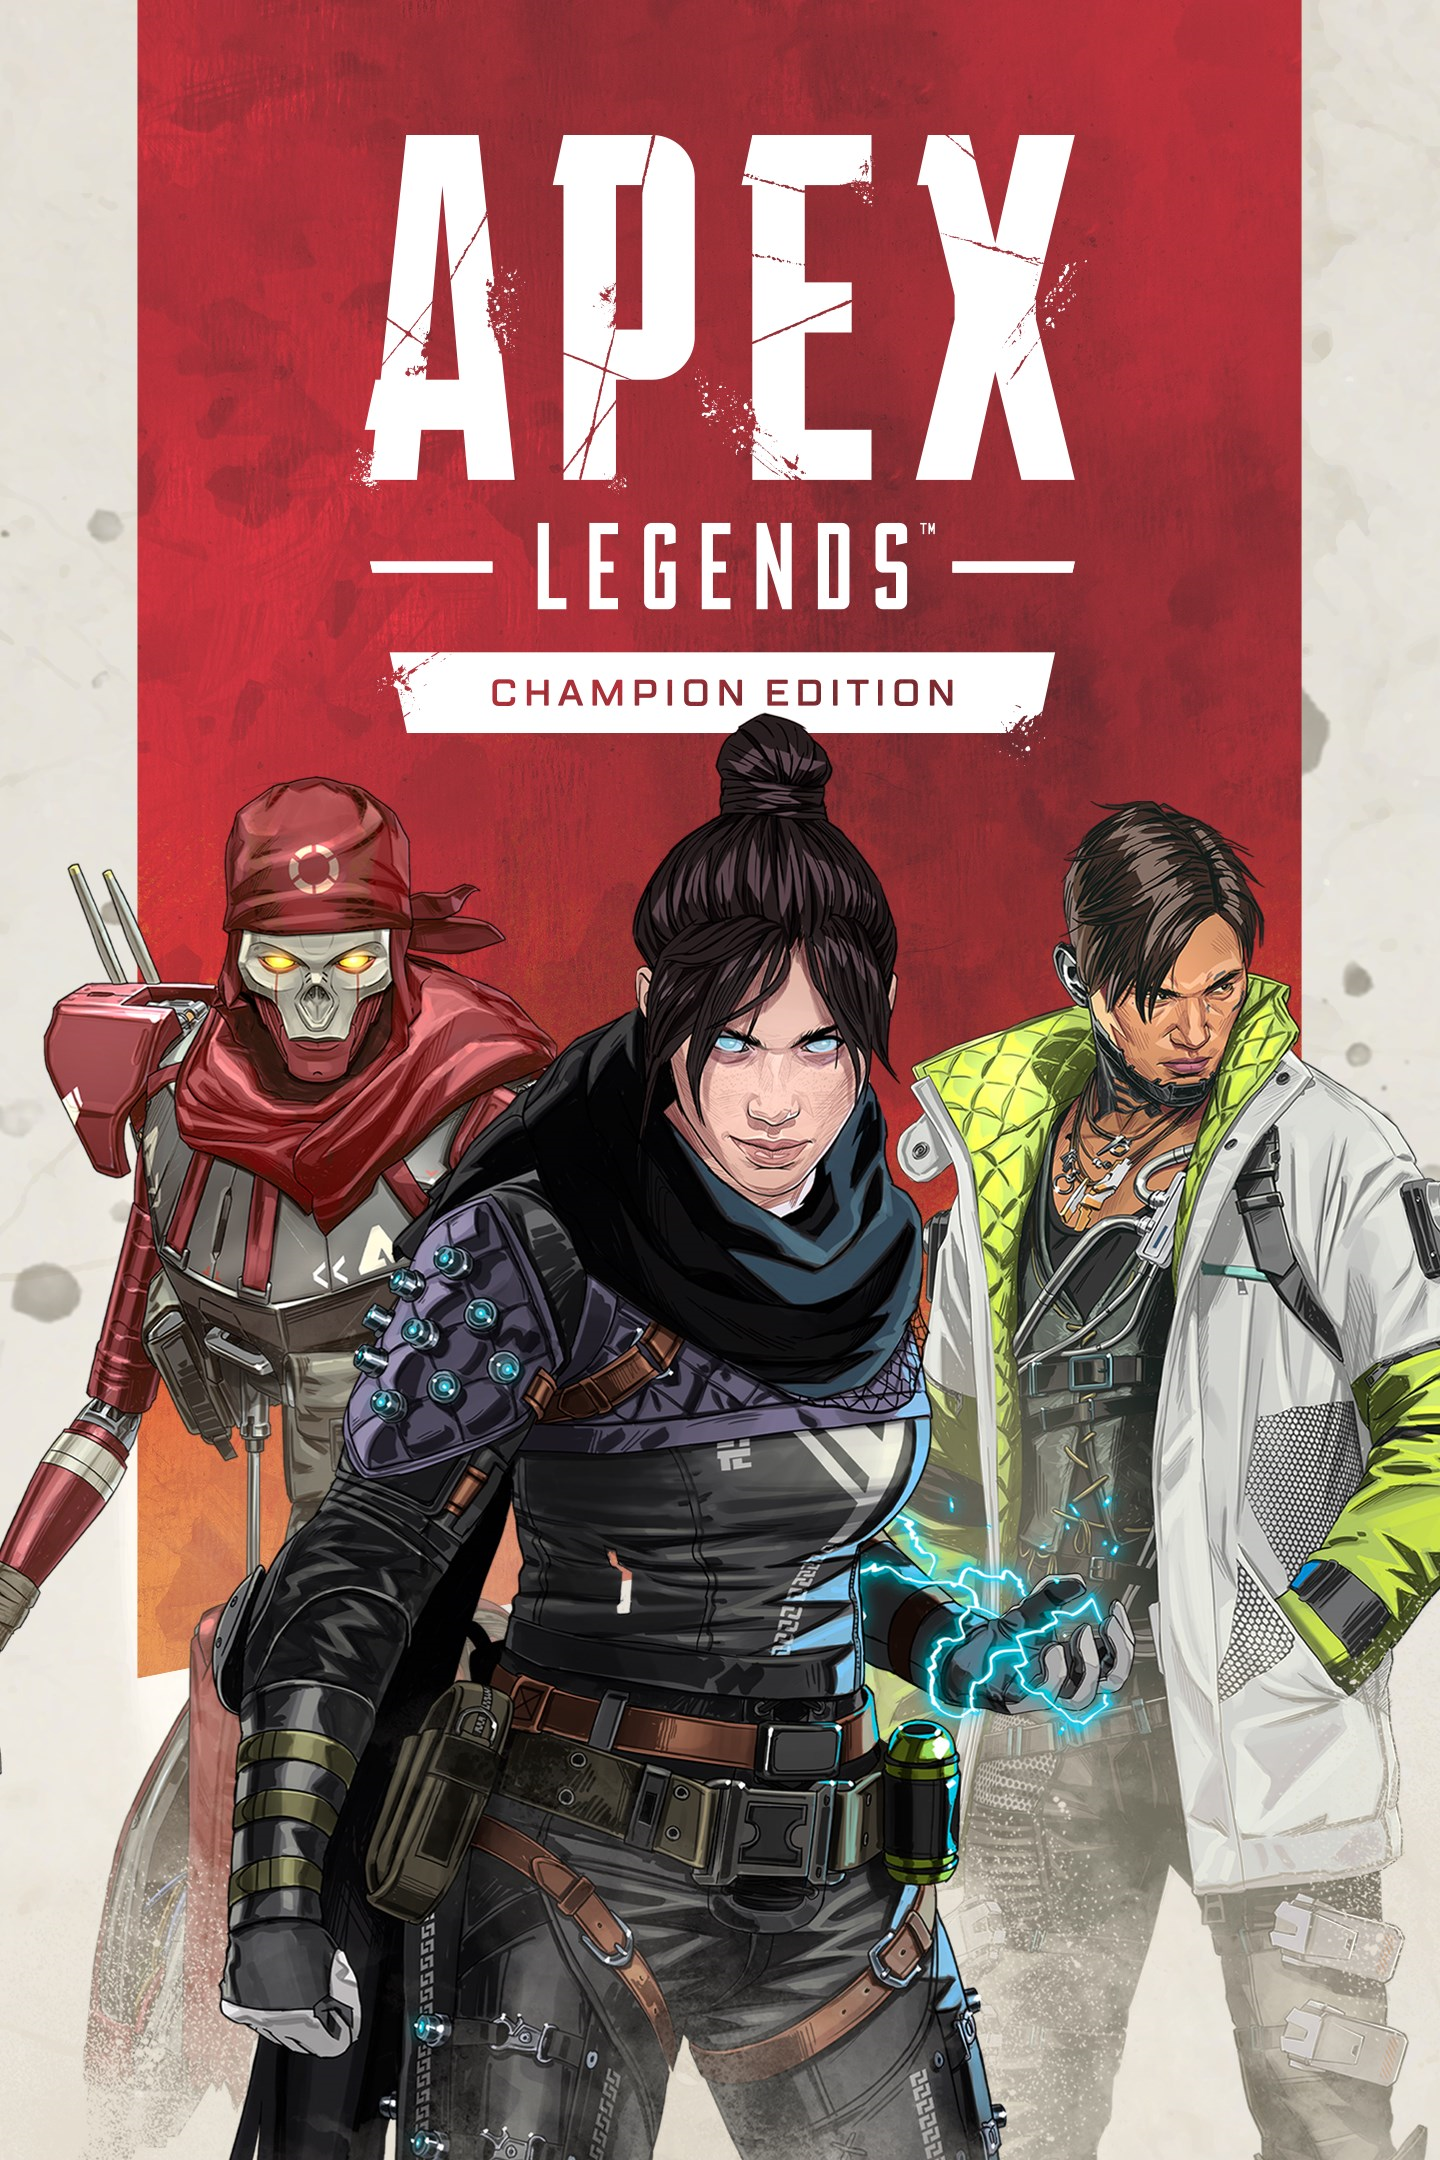 Content Pack Apex Legends Wiki